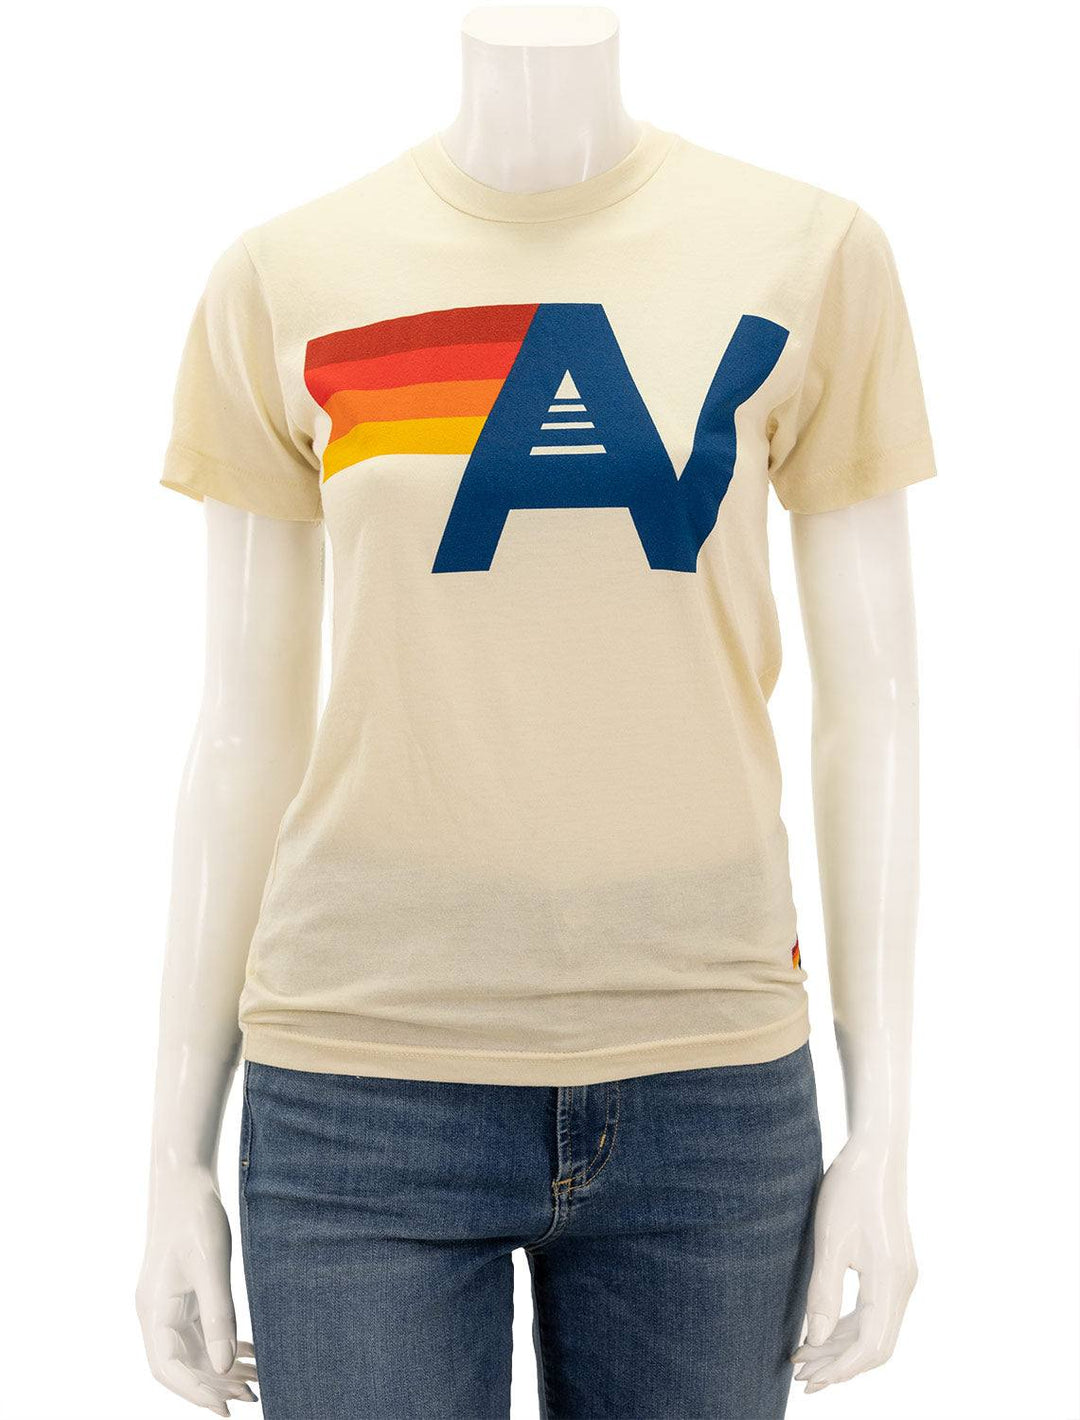 Front view of Aviator Nation's logo crew tee shirt in vintage white.